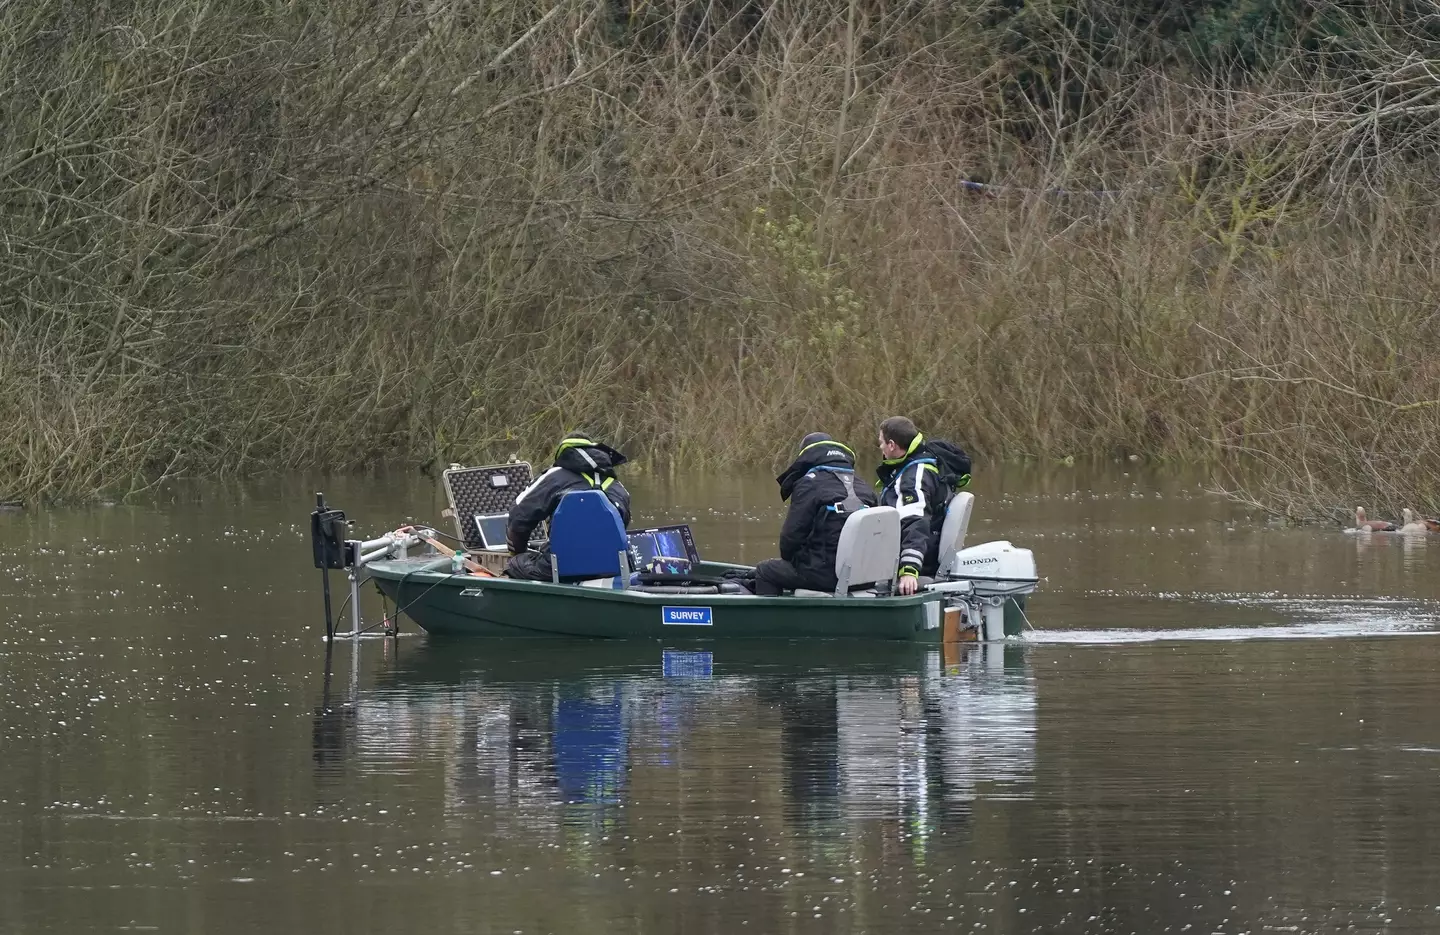 Police recovered a body as they searched the River Wensum.